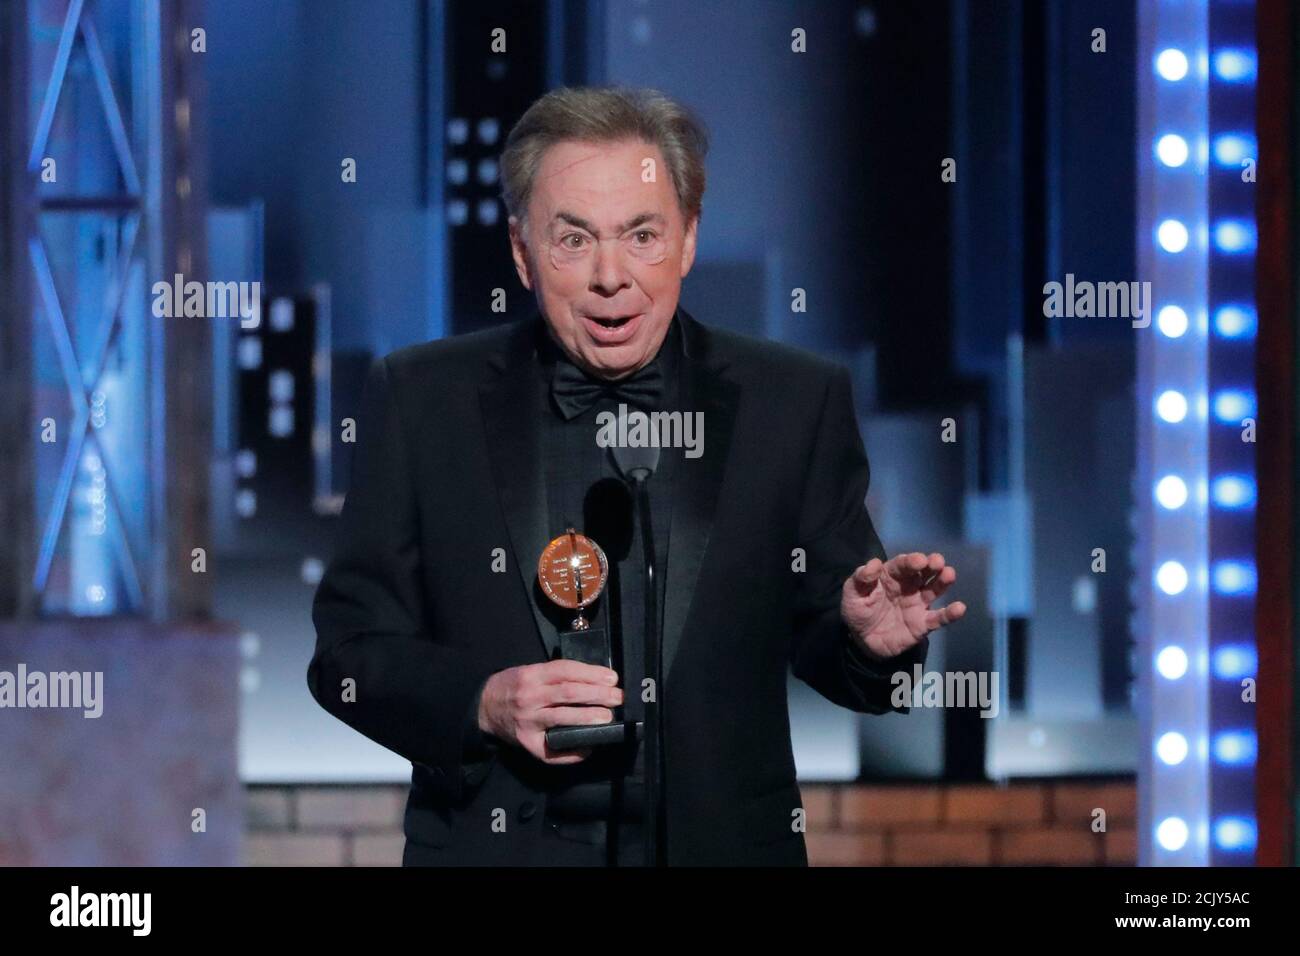 72nd Annual Tony Awards - Show - New York, U.S., 10/06/2018 - Andrew Lloyd Webber receives accepts lifetime achievement honors. REUTERS/Lucas Jackson Stock Photo